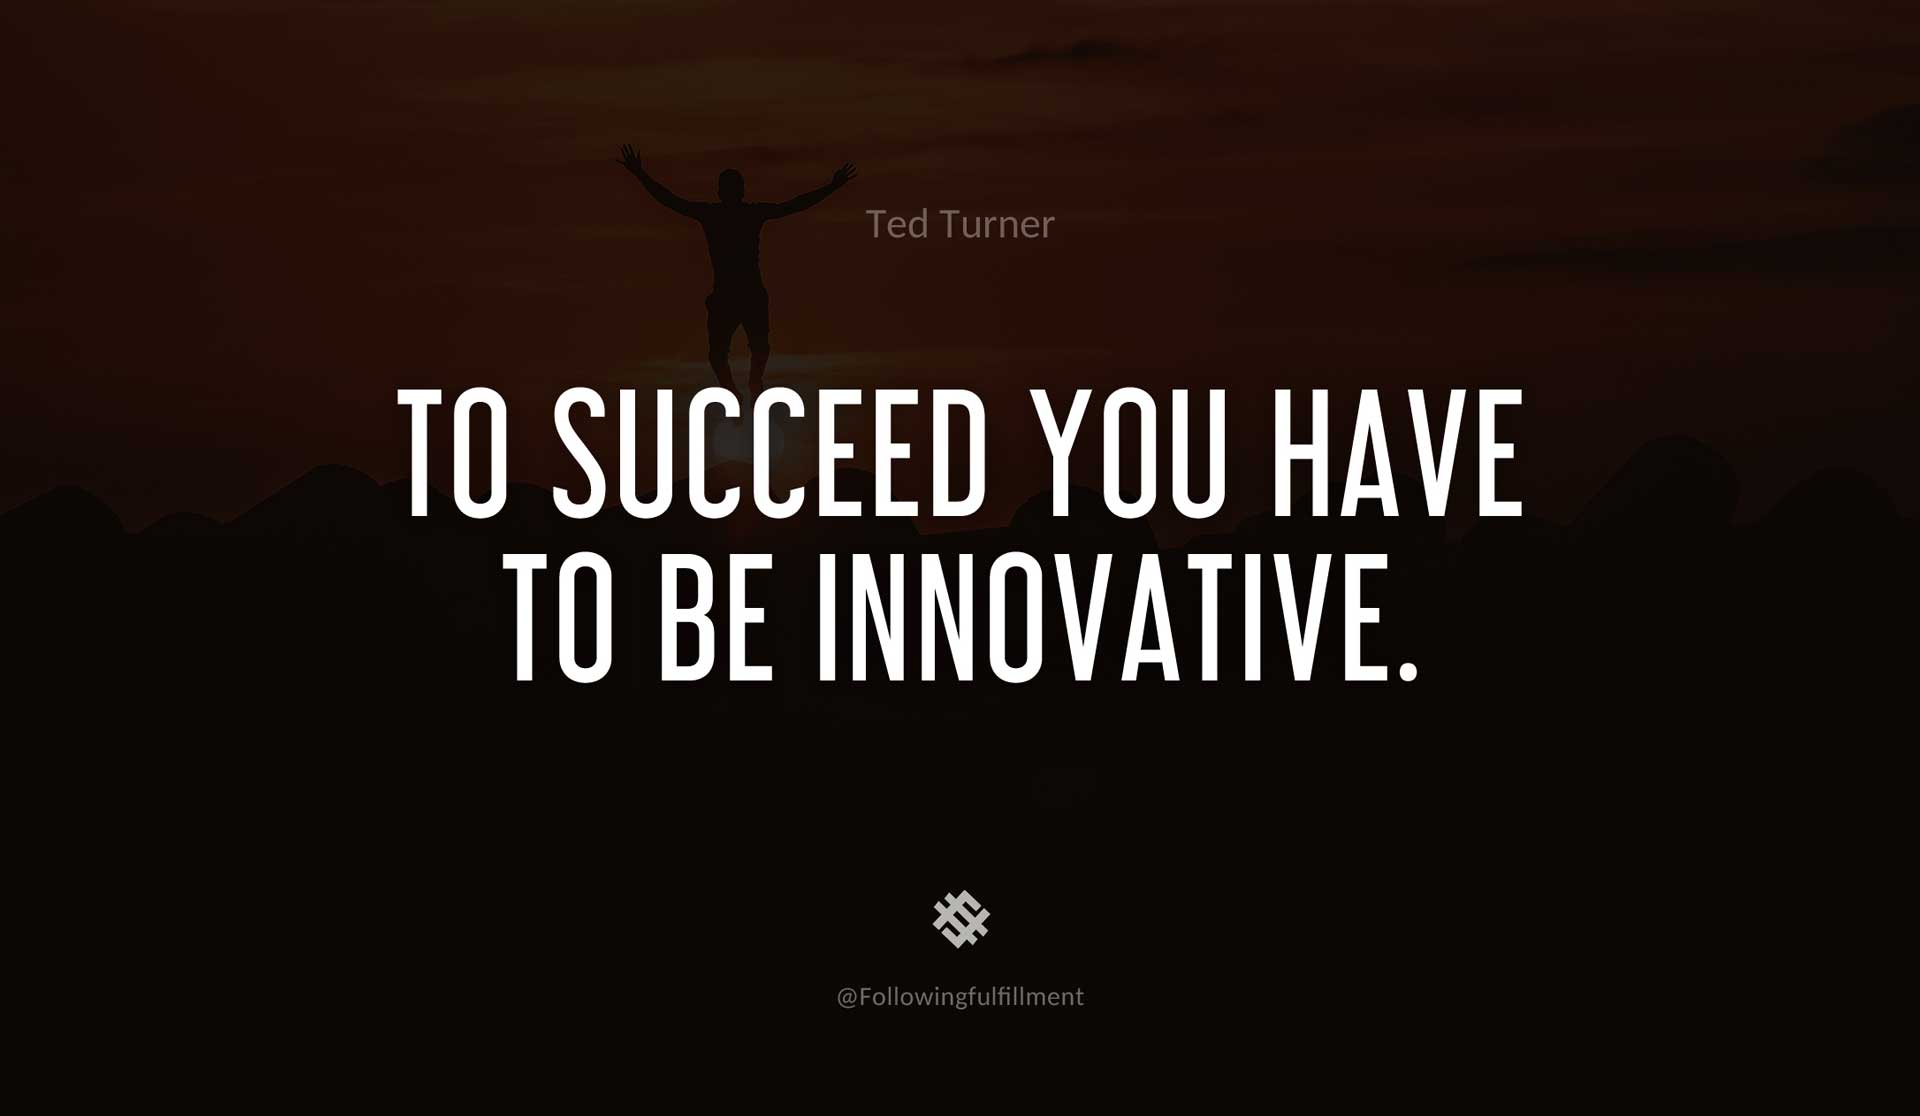 To-succeed-you-have-to-be-innovative.-TED-TURNER-Quote.jpg